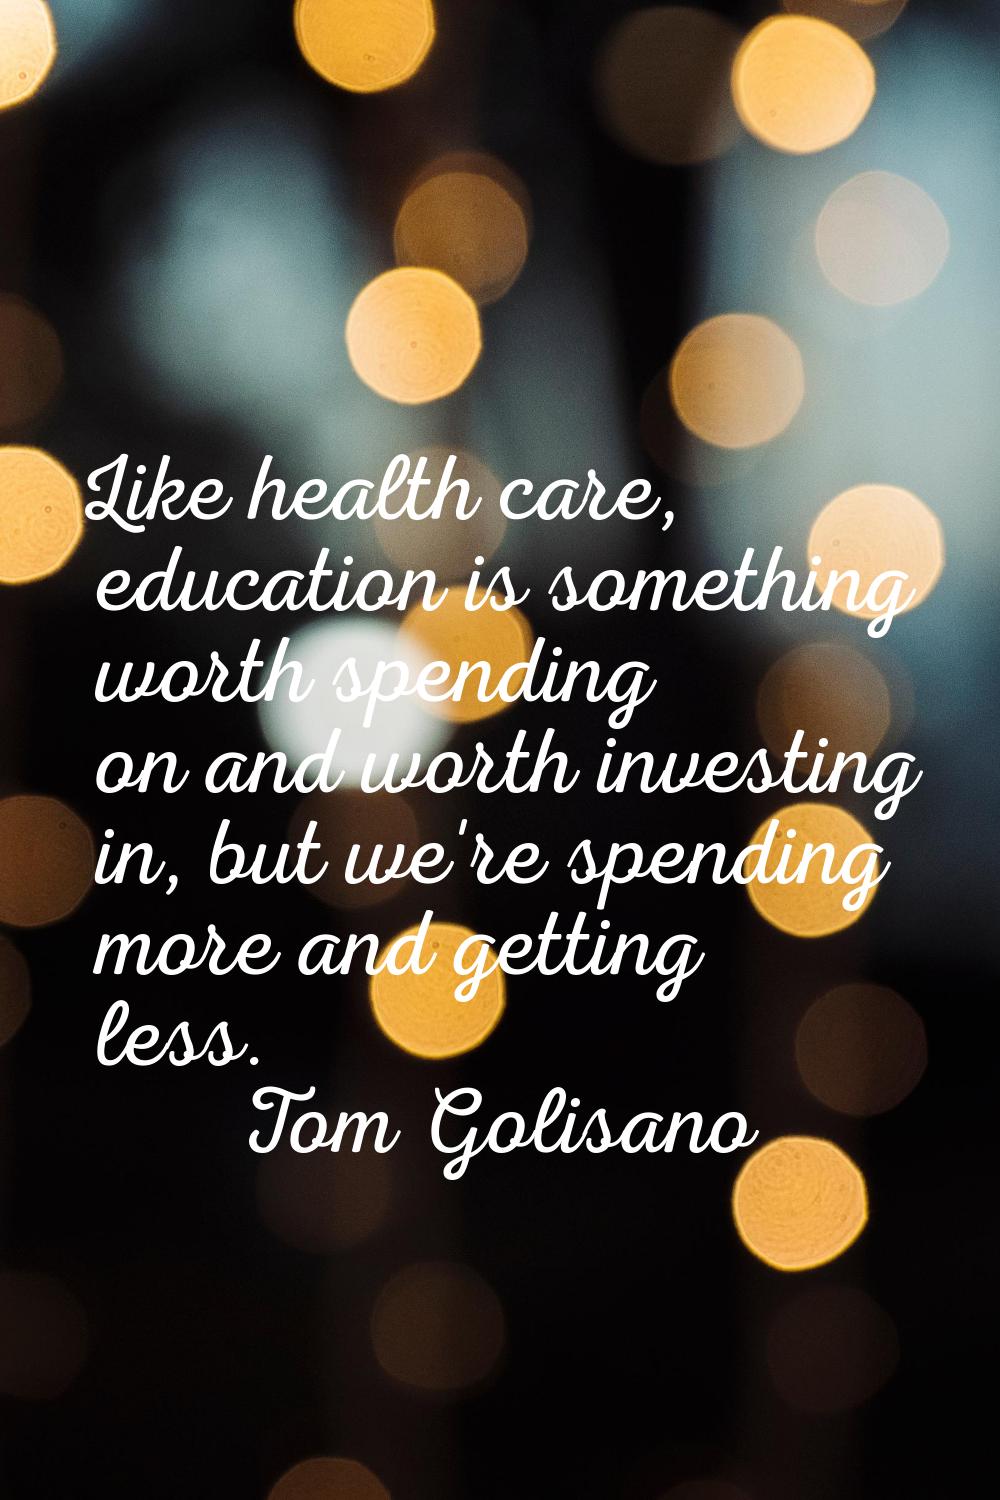 Like health care, education is something worth spending on and worth investing in, but we're spendi